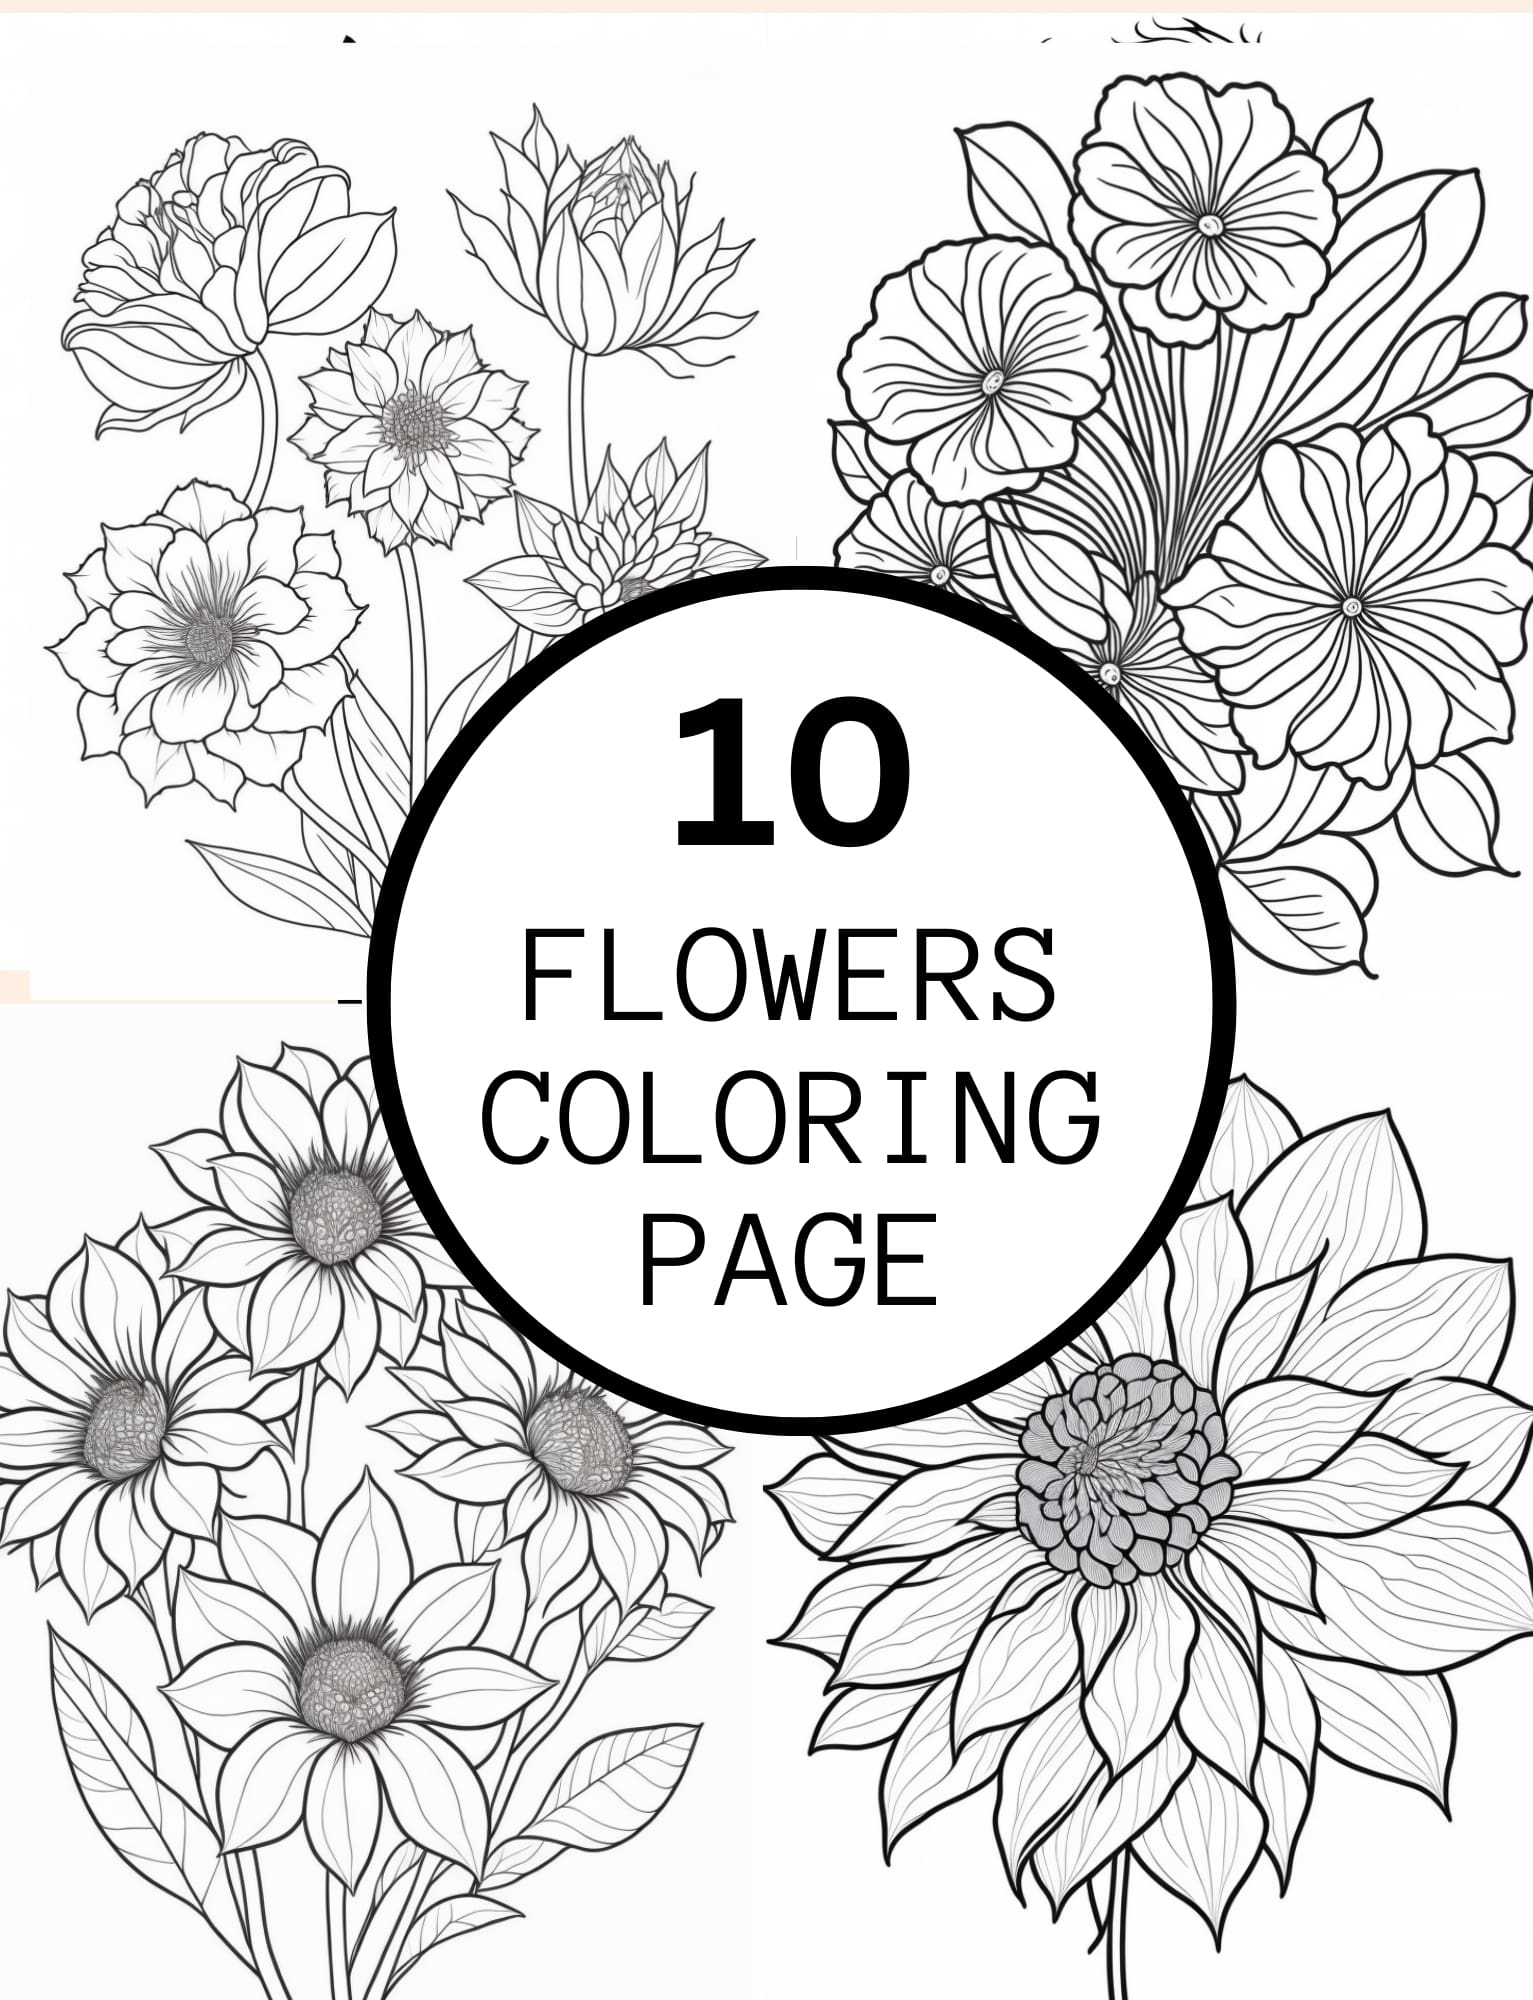 Realistic flowers coloring pages for kids and adults made by teachers